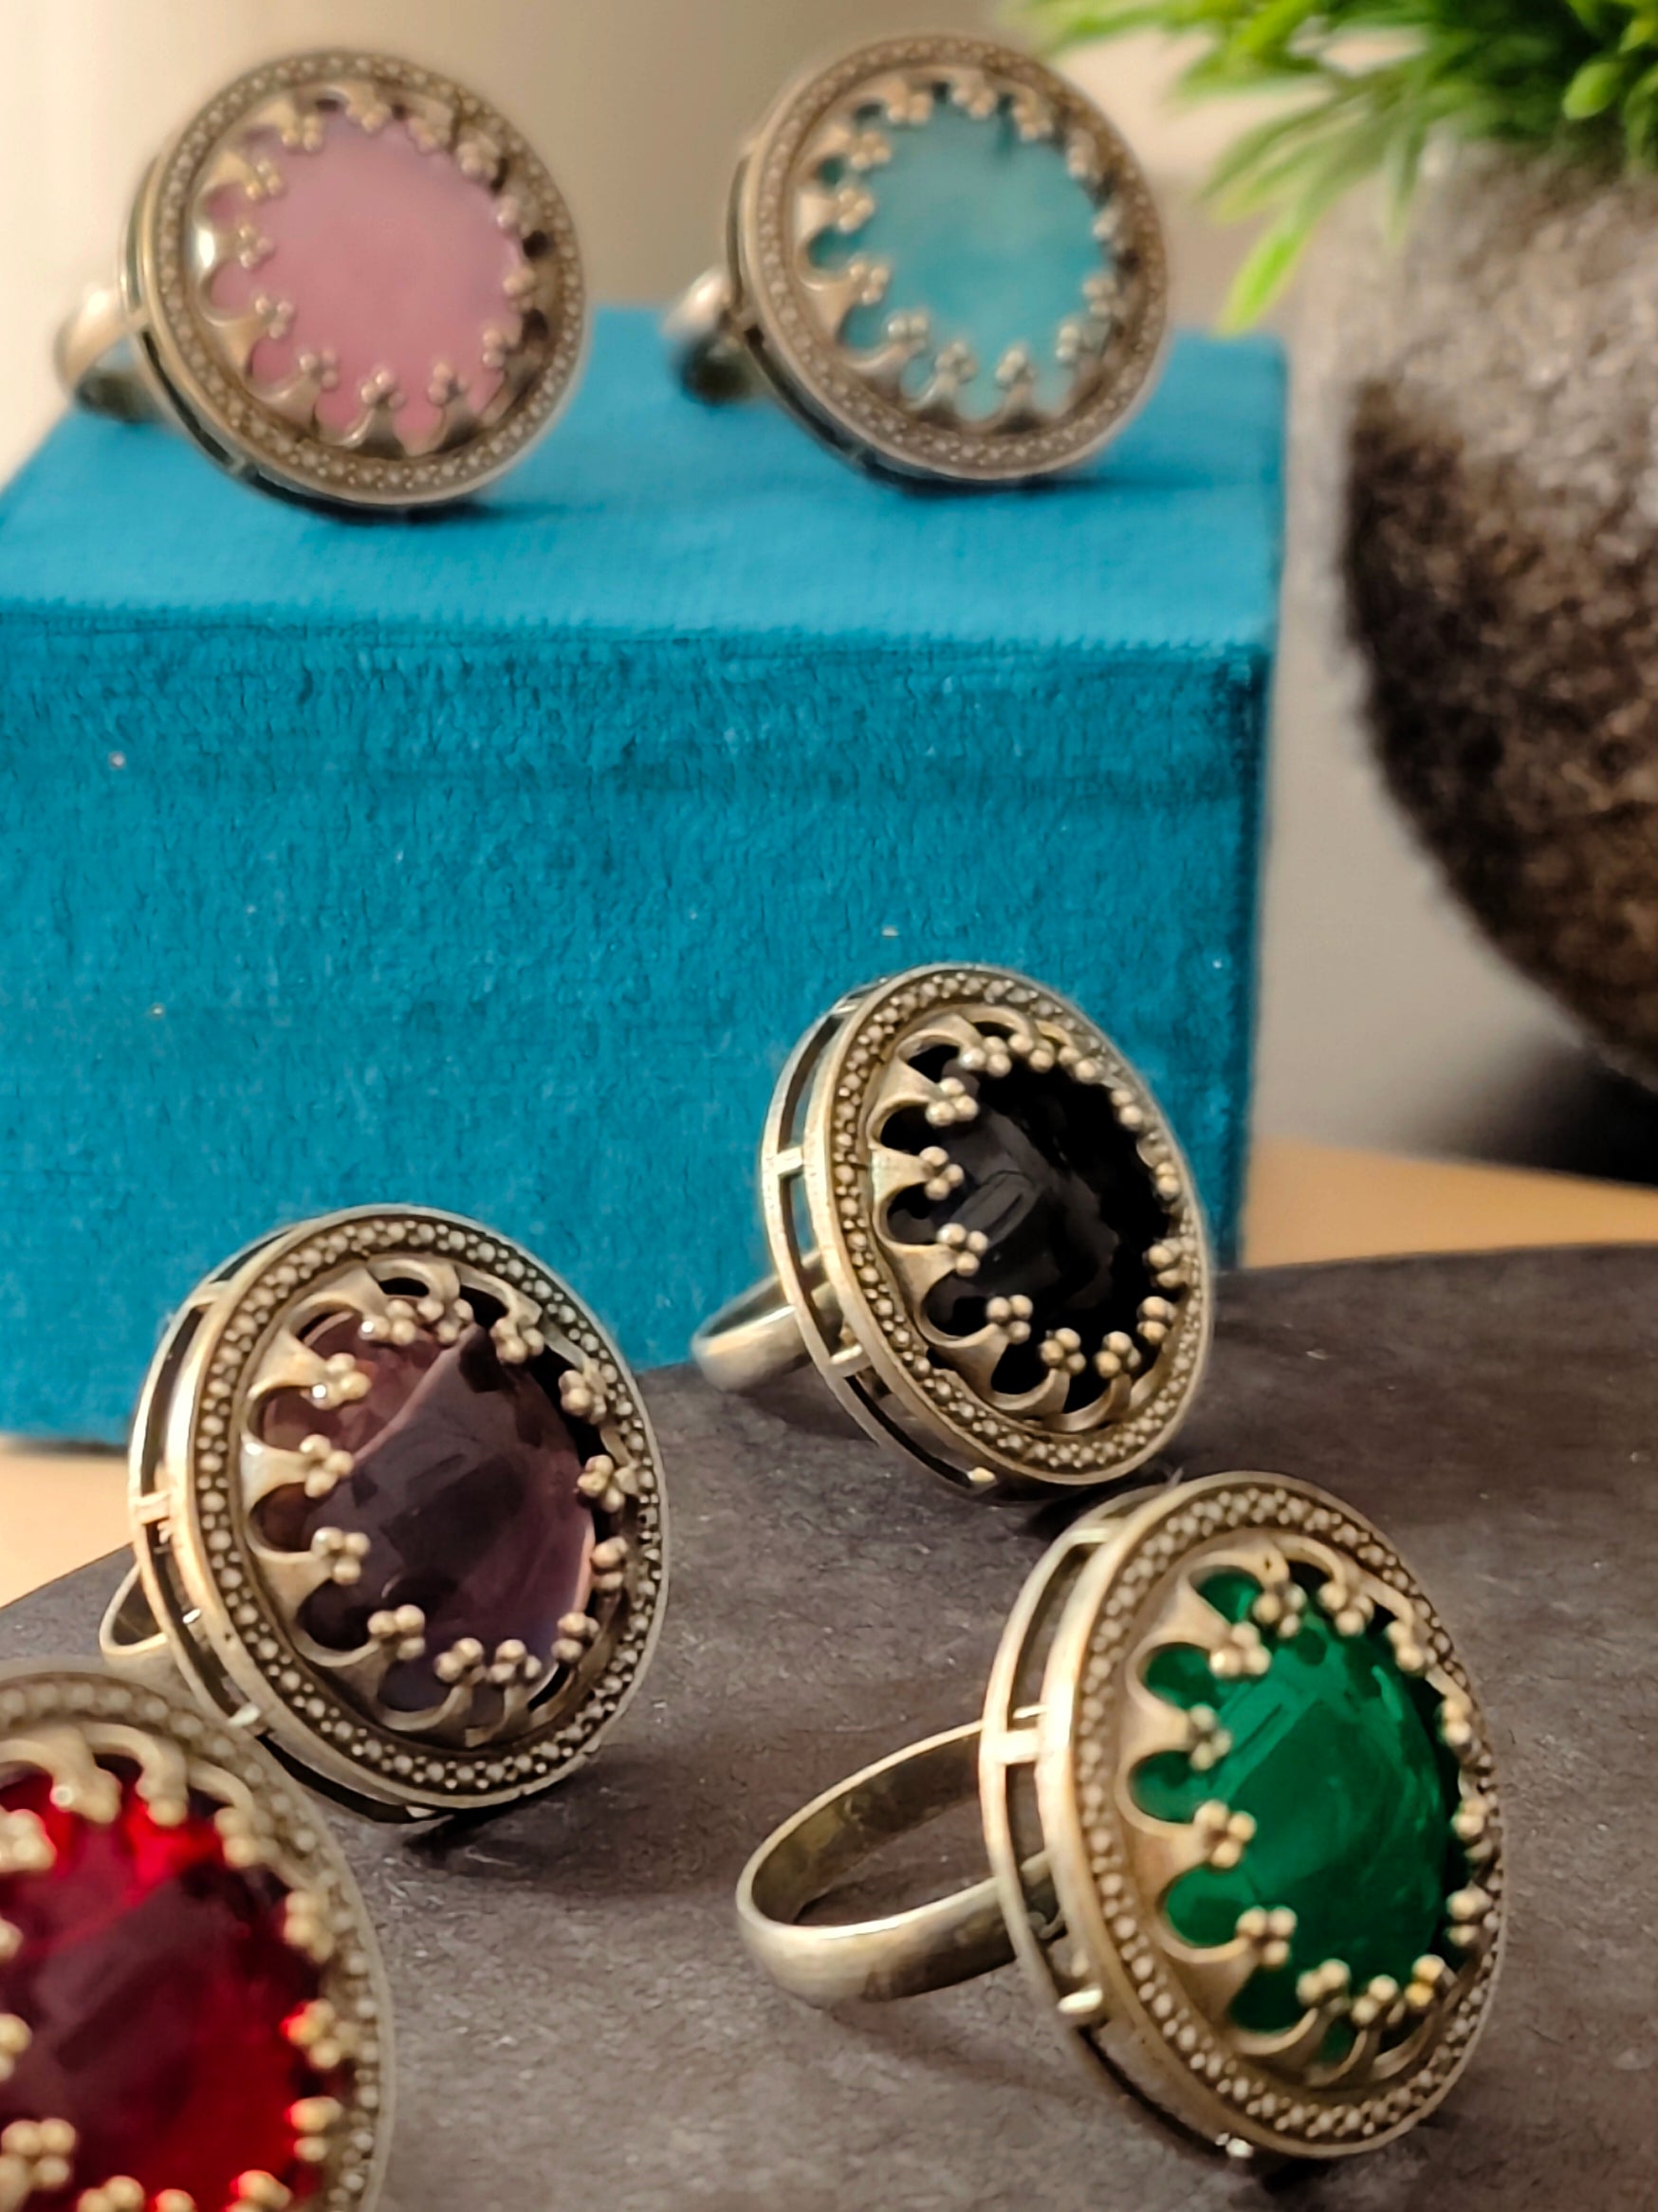 Aganya Multi Color Adjustable Rings with Antique Finish and Big Stone | Festive Occasions | for Traditional Look | for Office Indian Look-Brown - Mrigaya India